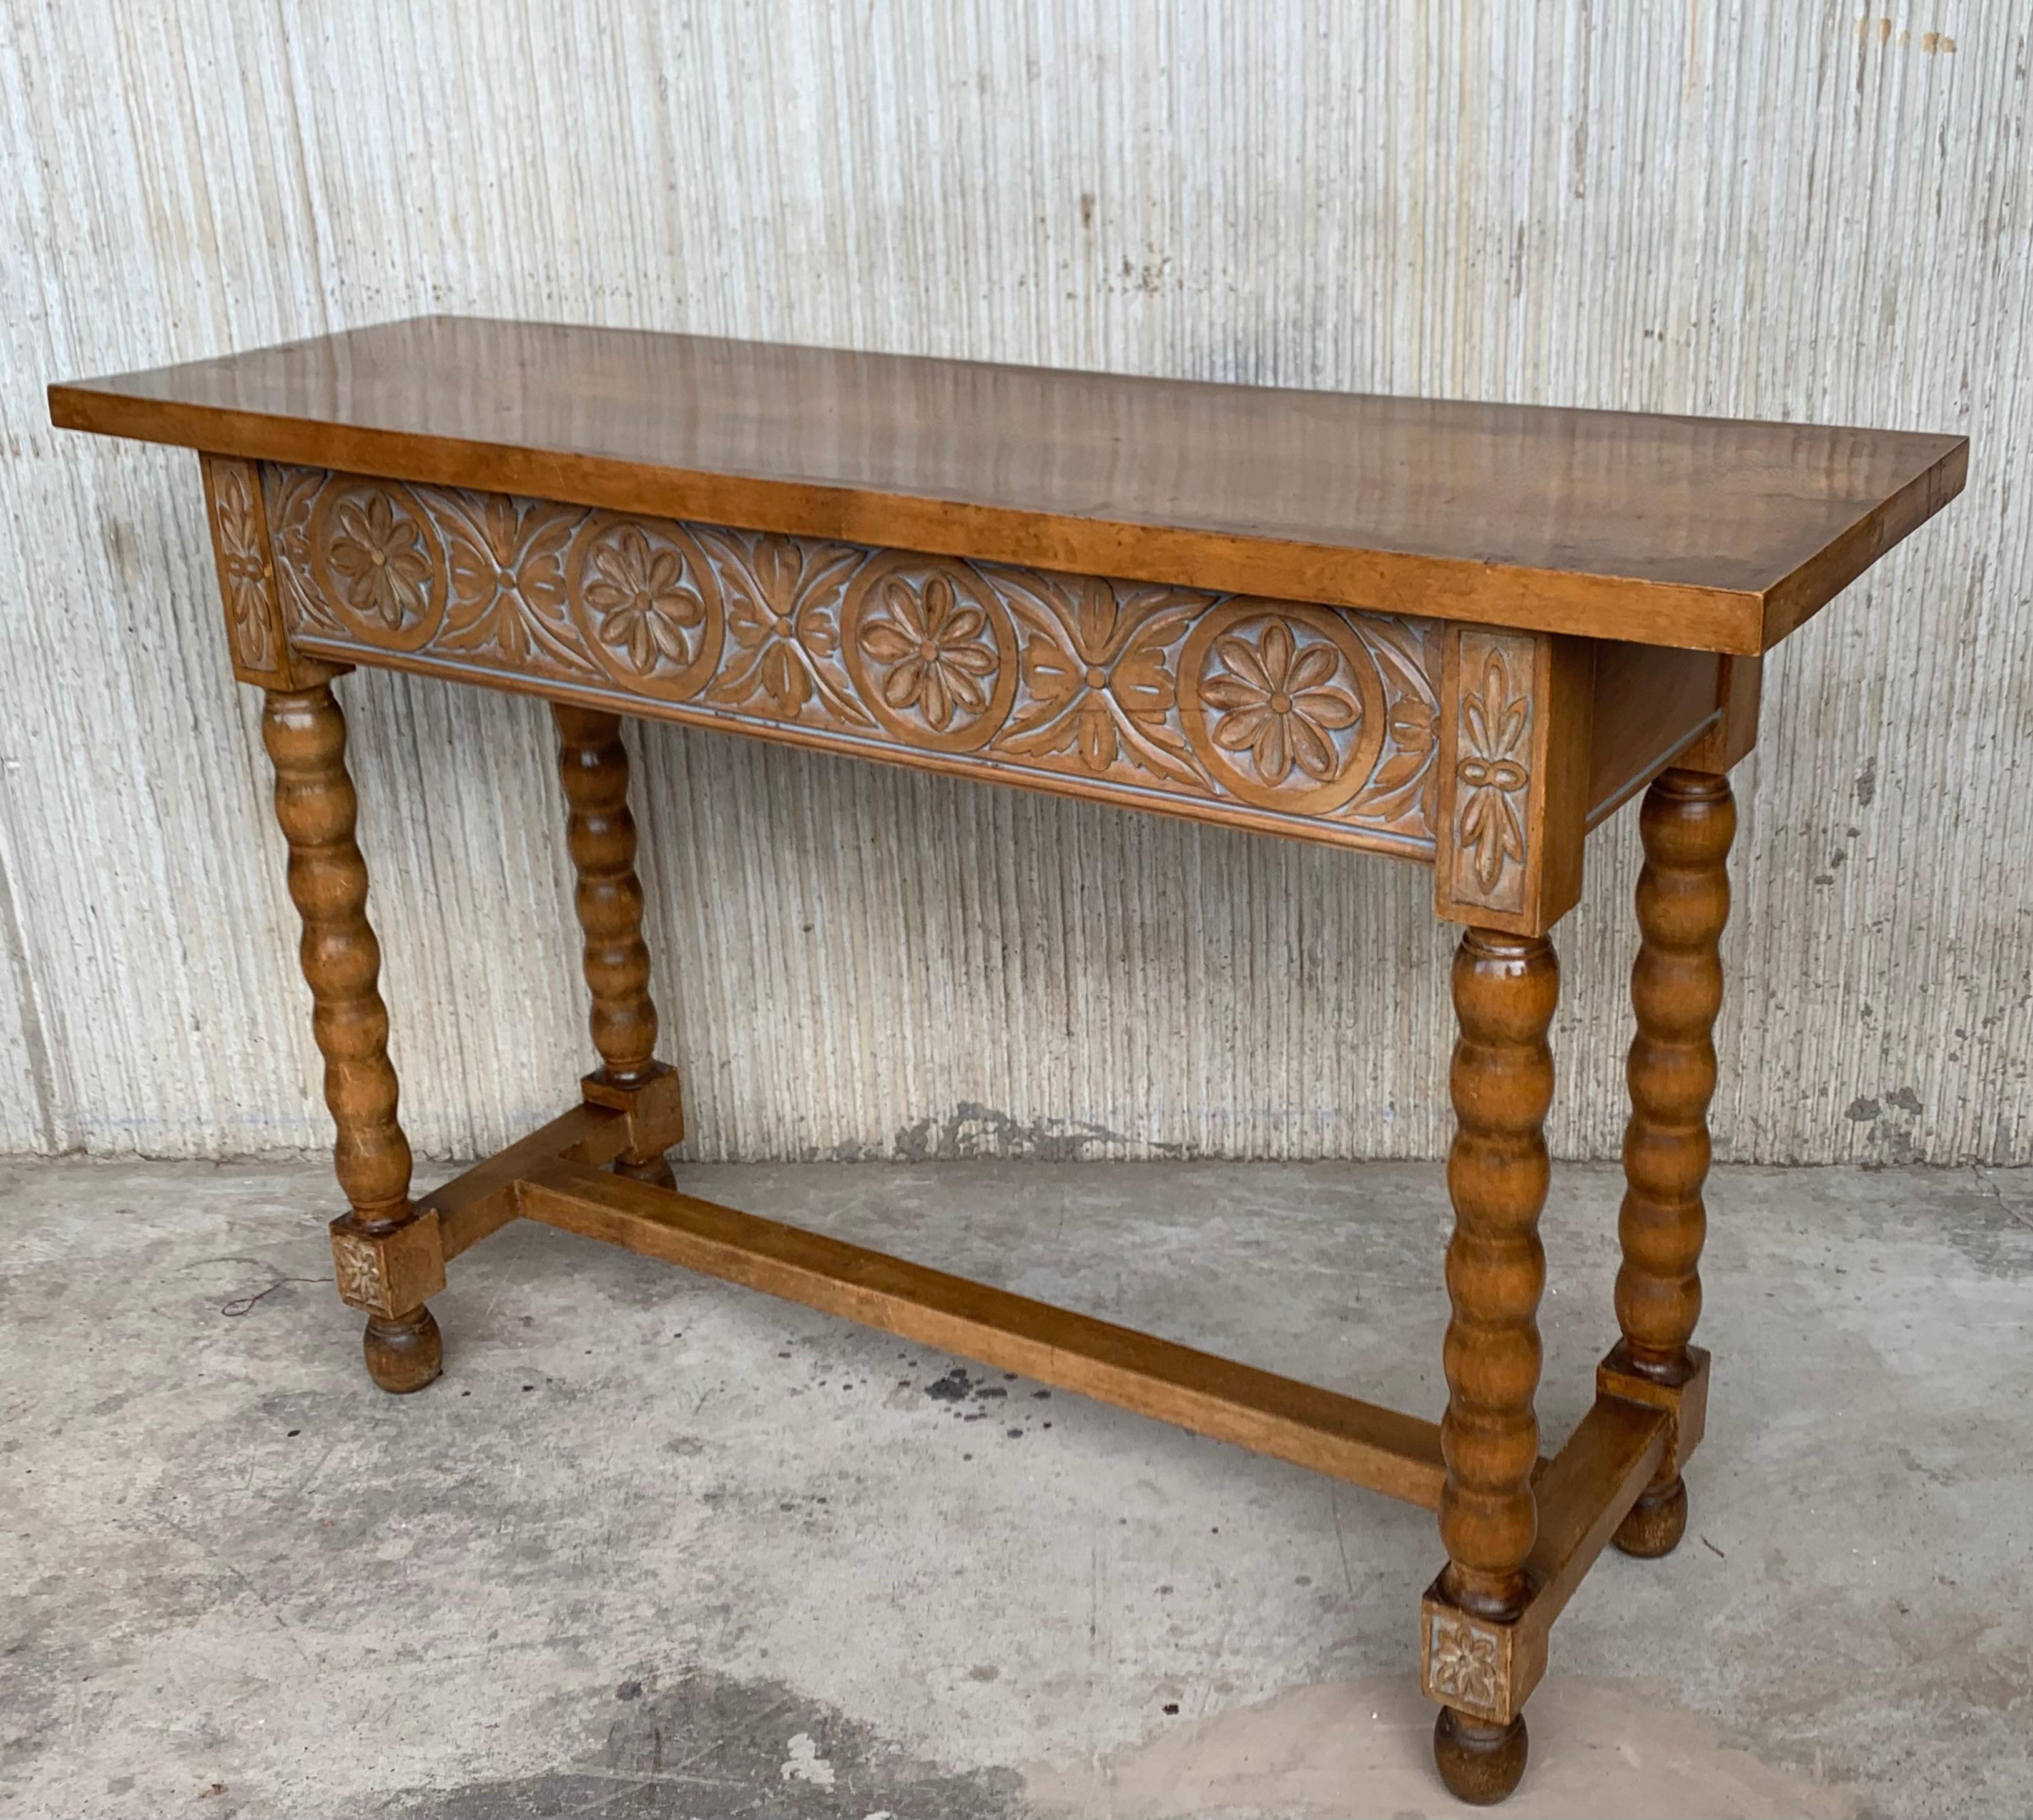 Walnut Early 20th Century Spanish Carved Console Table with Turned Legs